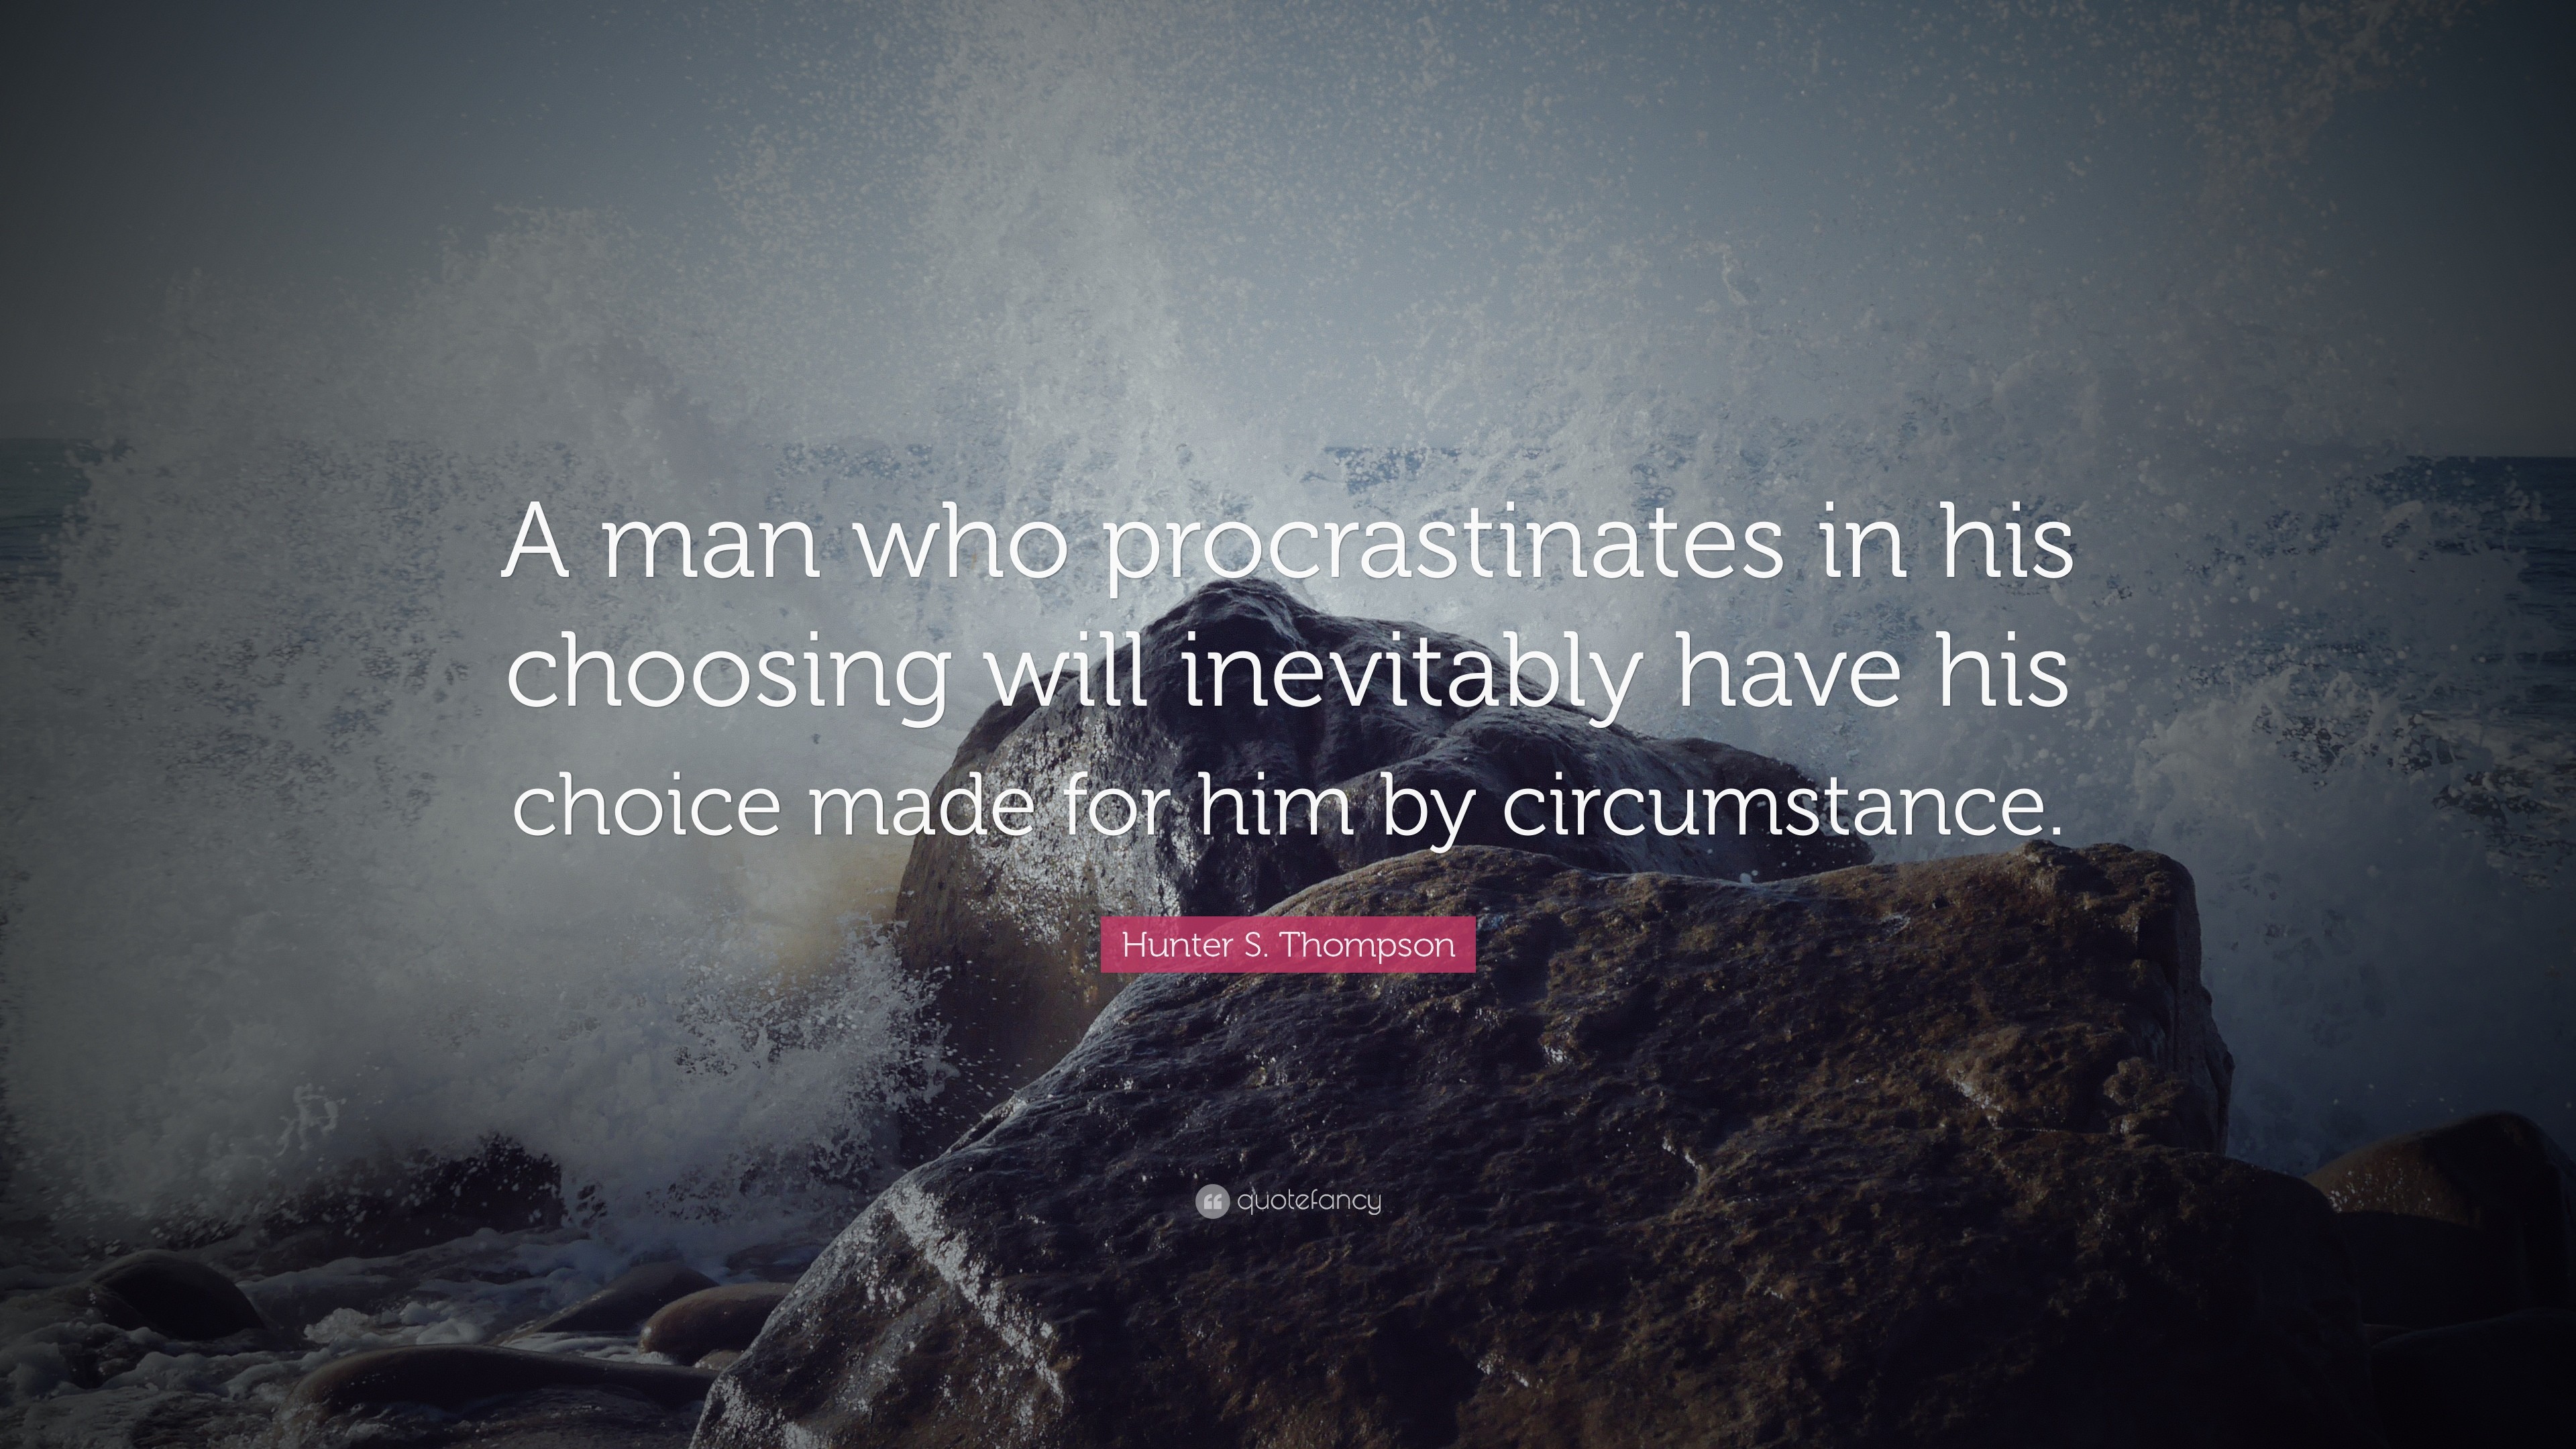 3840x2160 Hunter S. Thompson Quote: “A man who procrastinates in his choosing will  inevitably